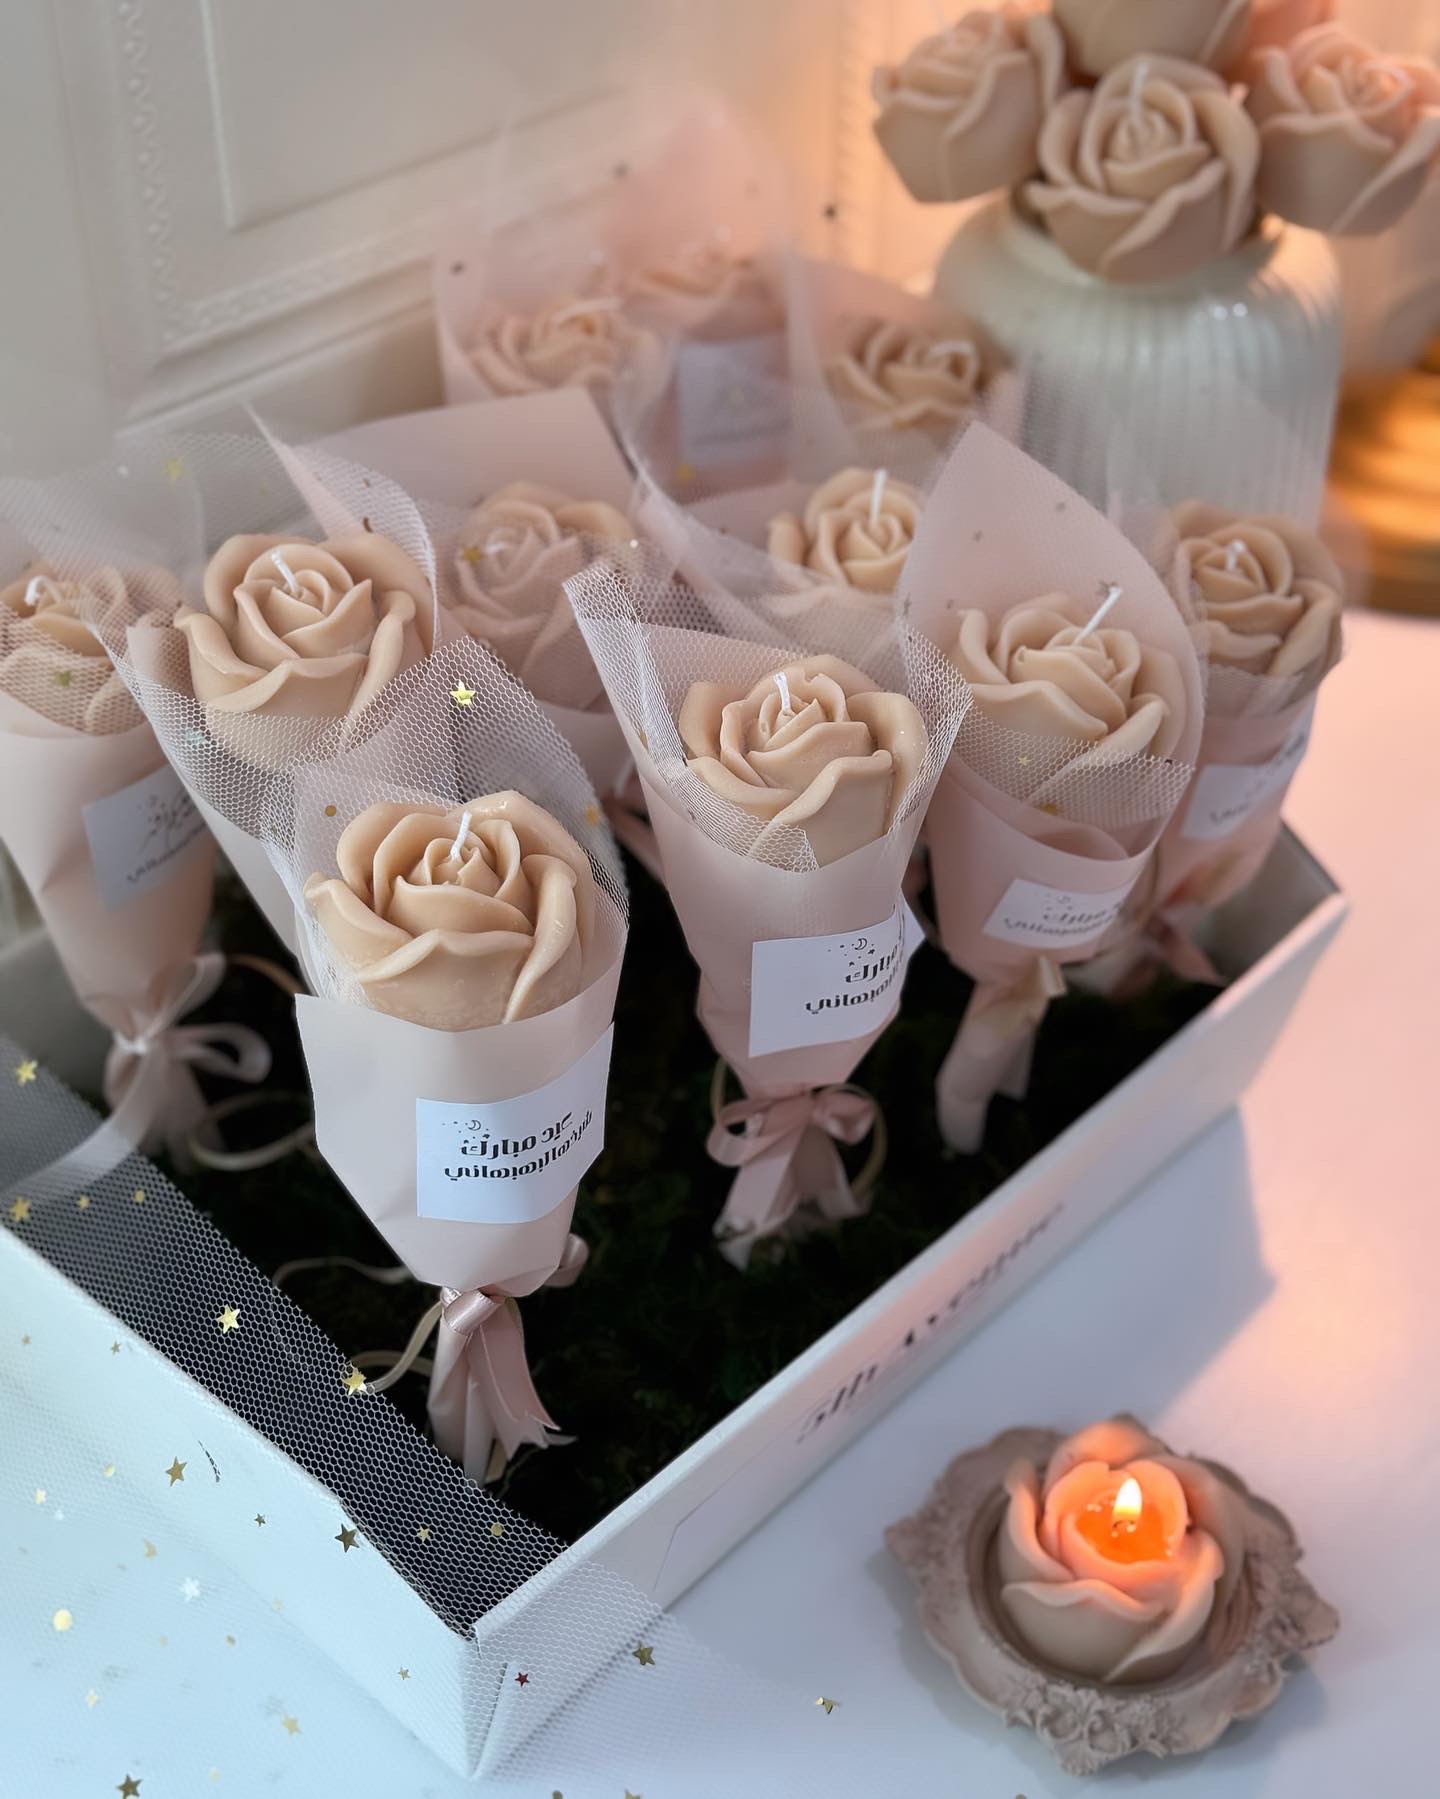 Rose candles